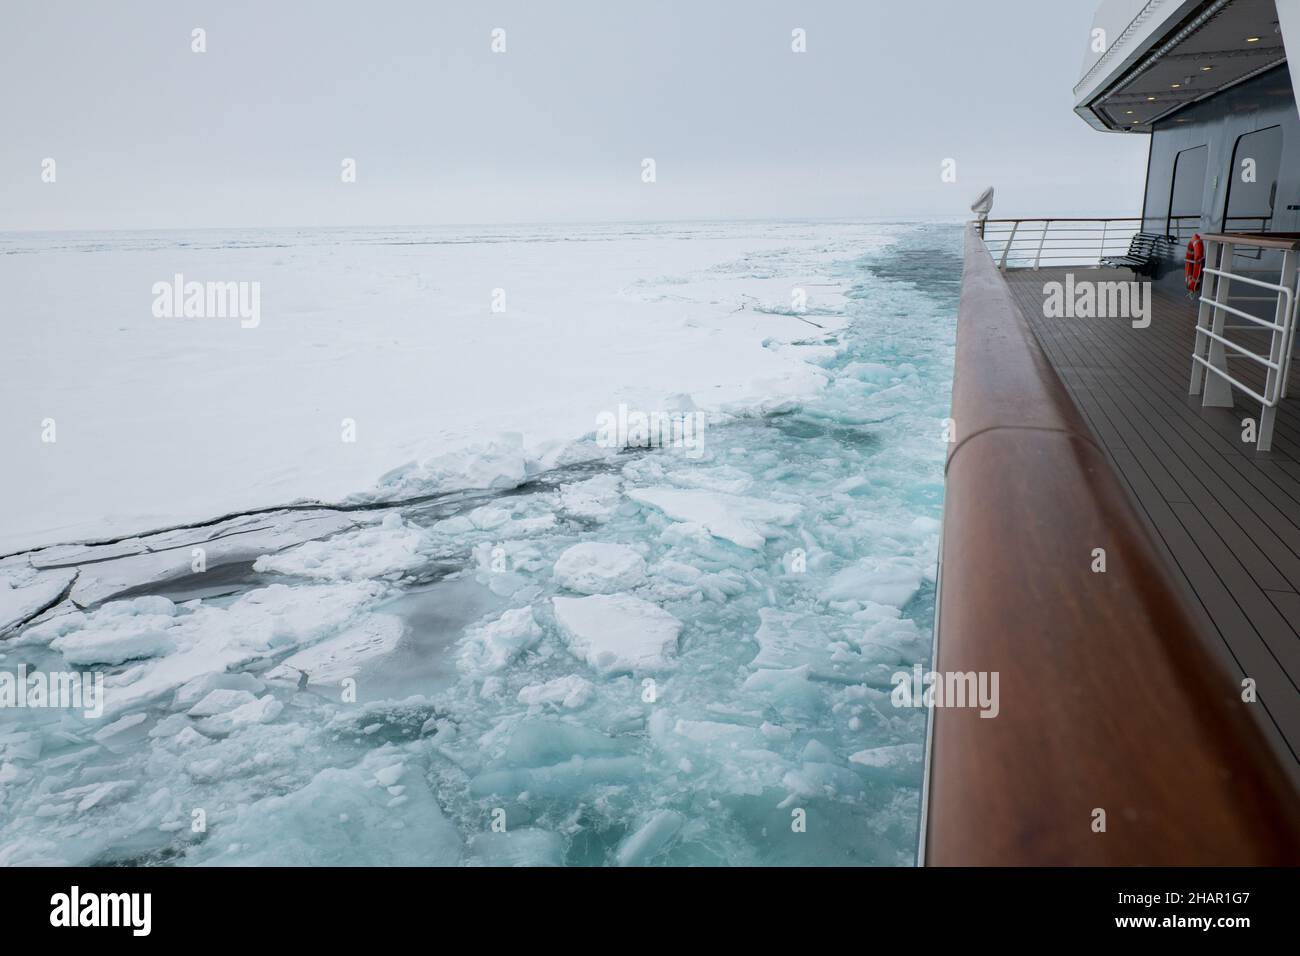 Arctic Norway, 89 degrees north. Le Commandant Charcot on the way to the North Pole. Heated outer deck. Stock Photo